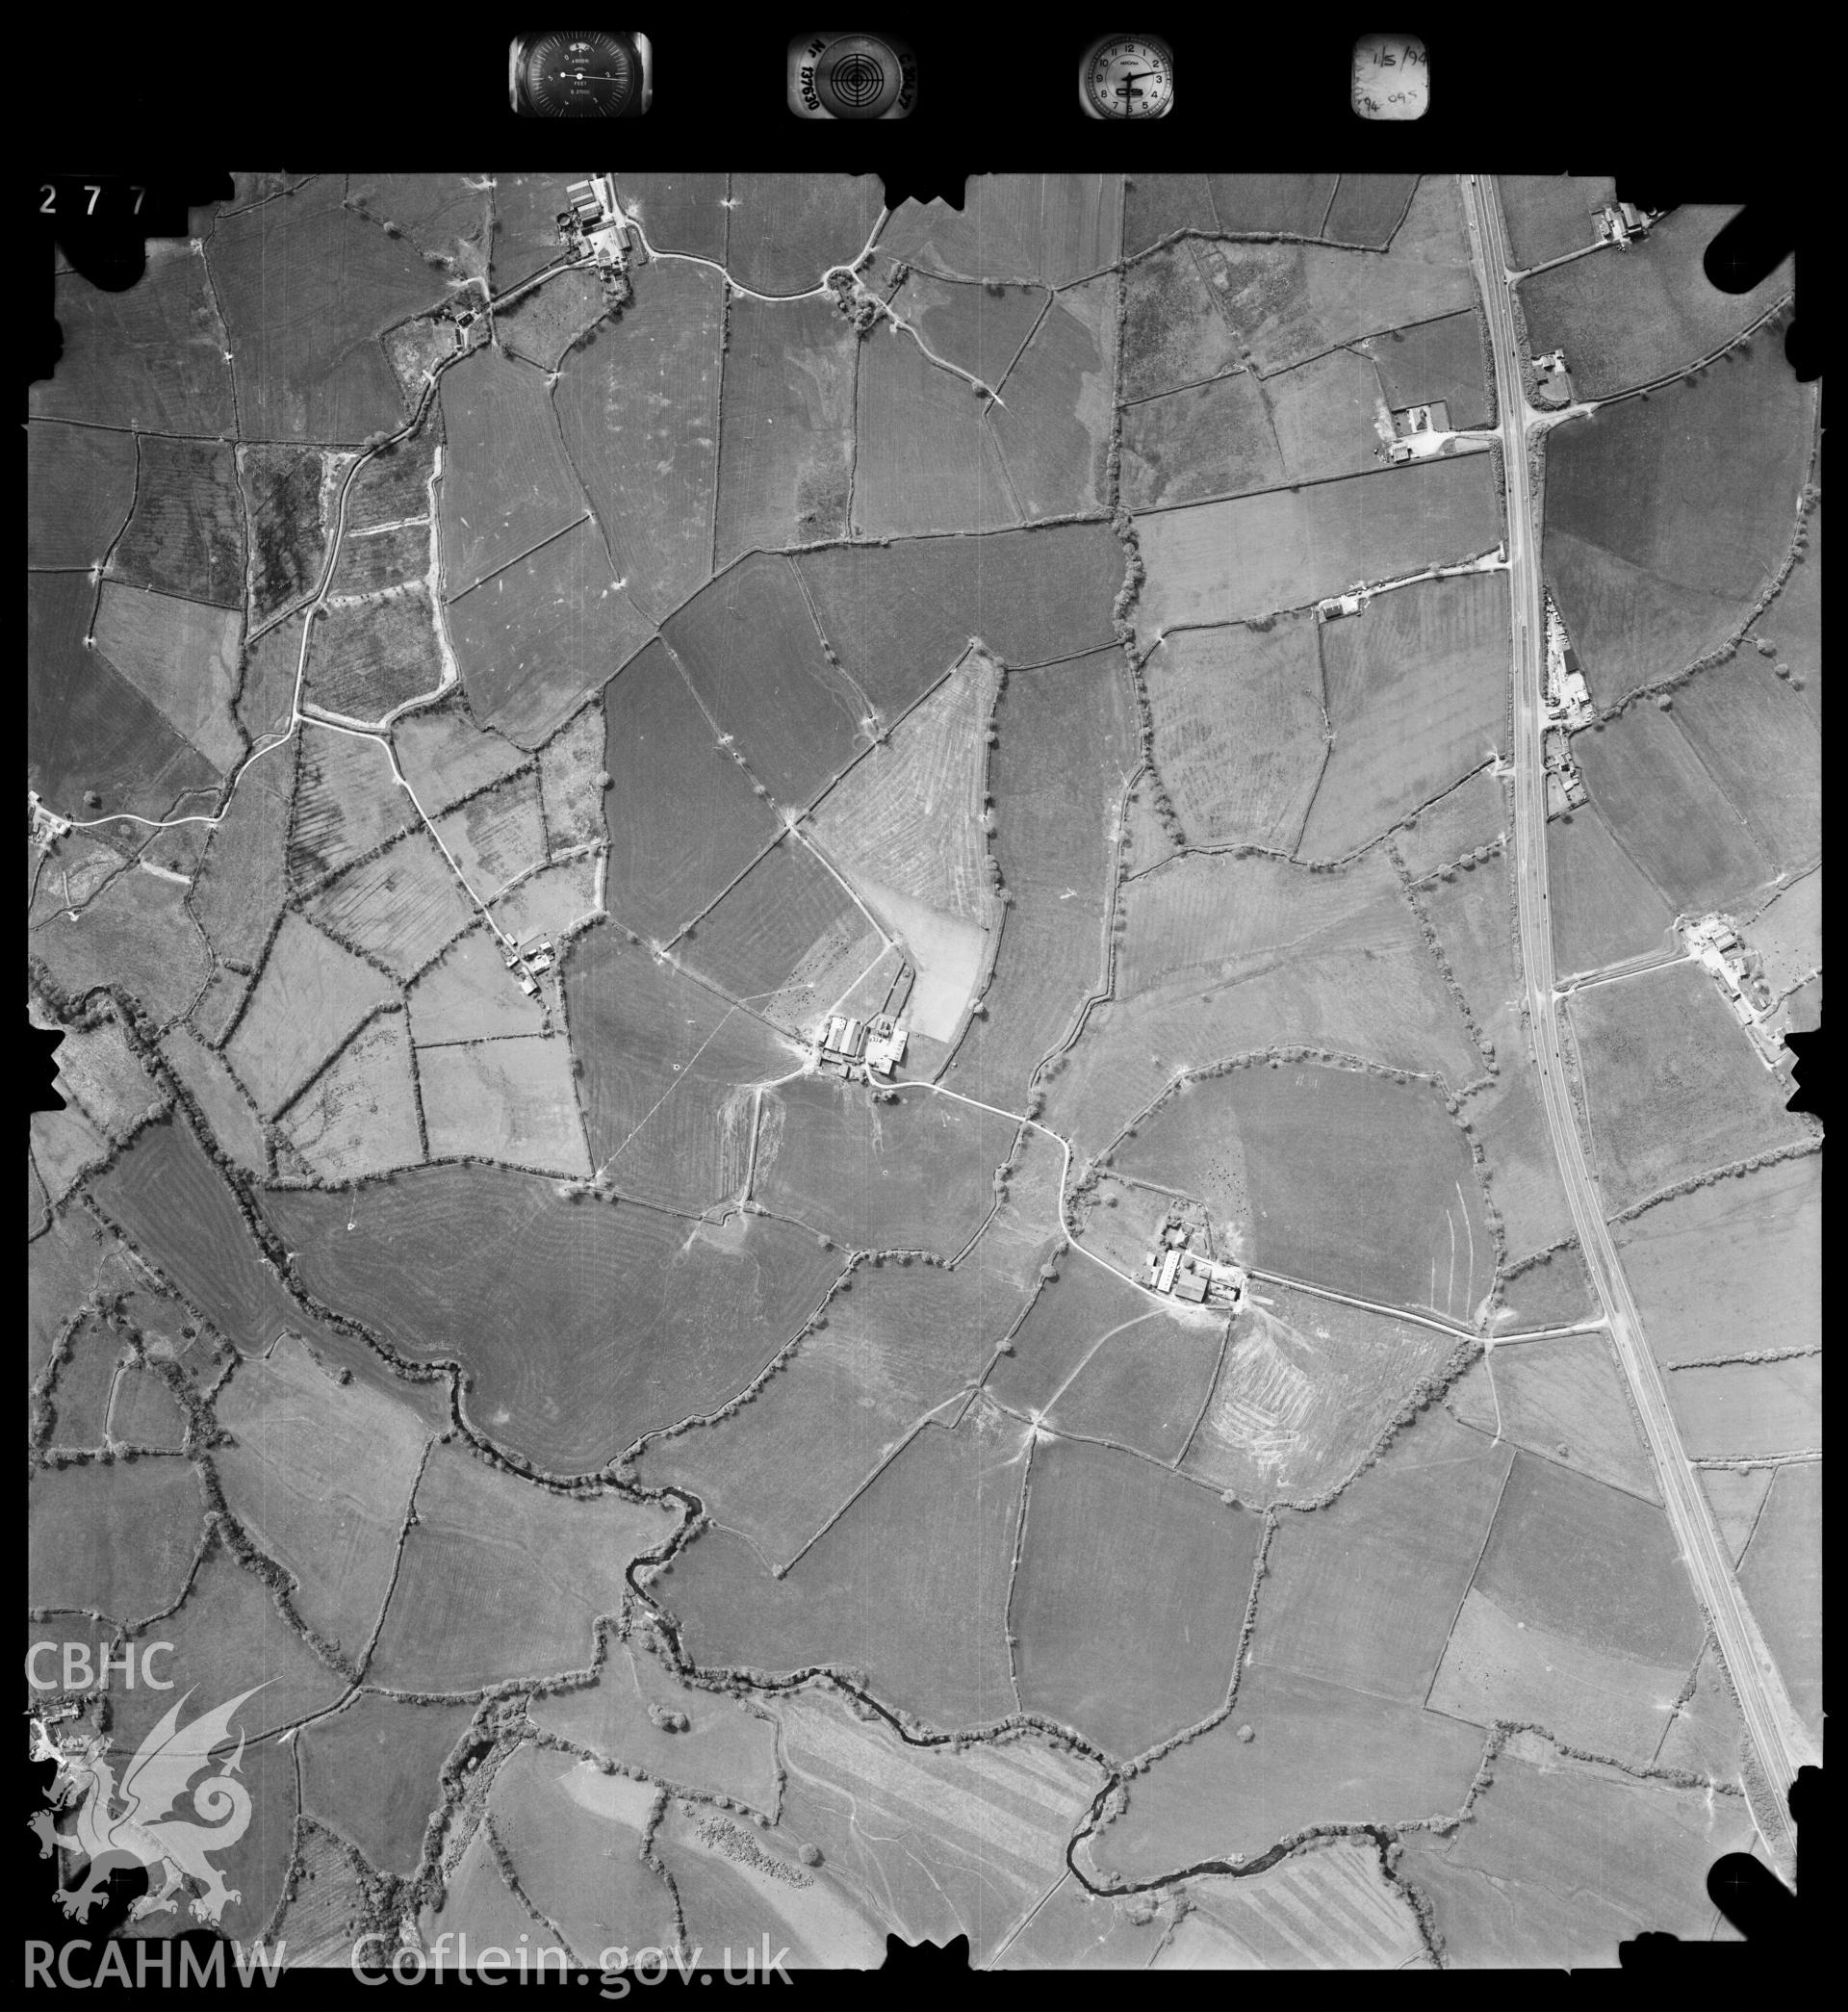 Digitized copy of an aerial photograph showing St Clears area in Carmarthenshire, taken by Ordnance Survey,  1994.